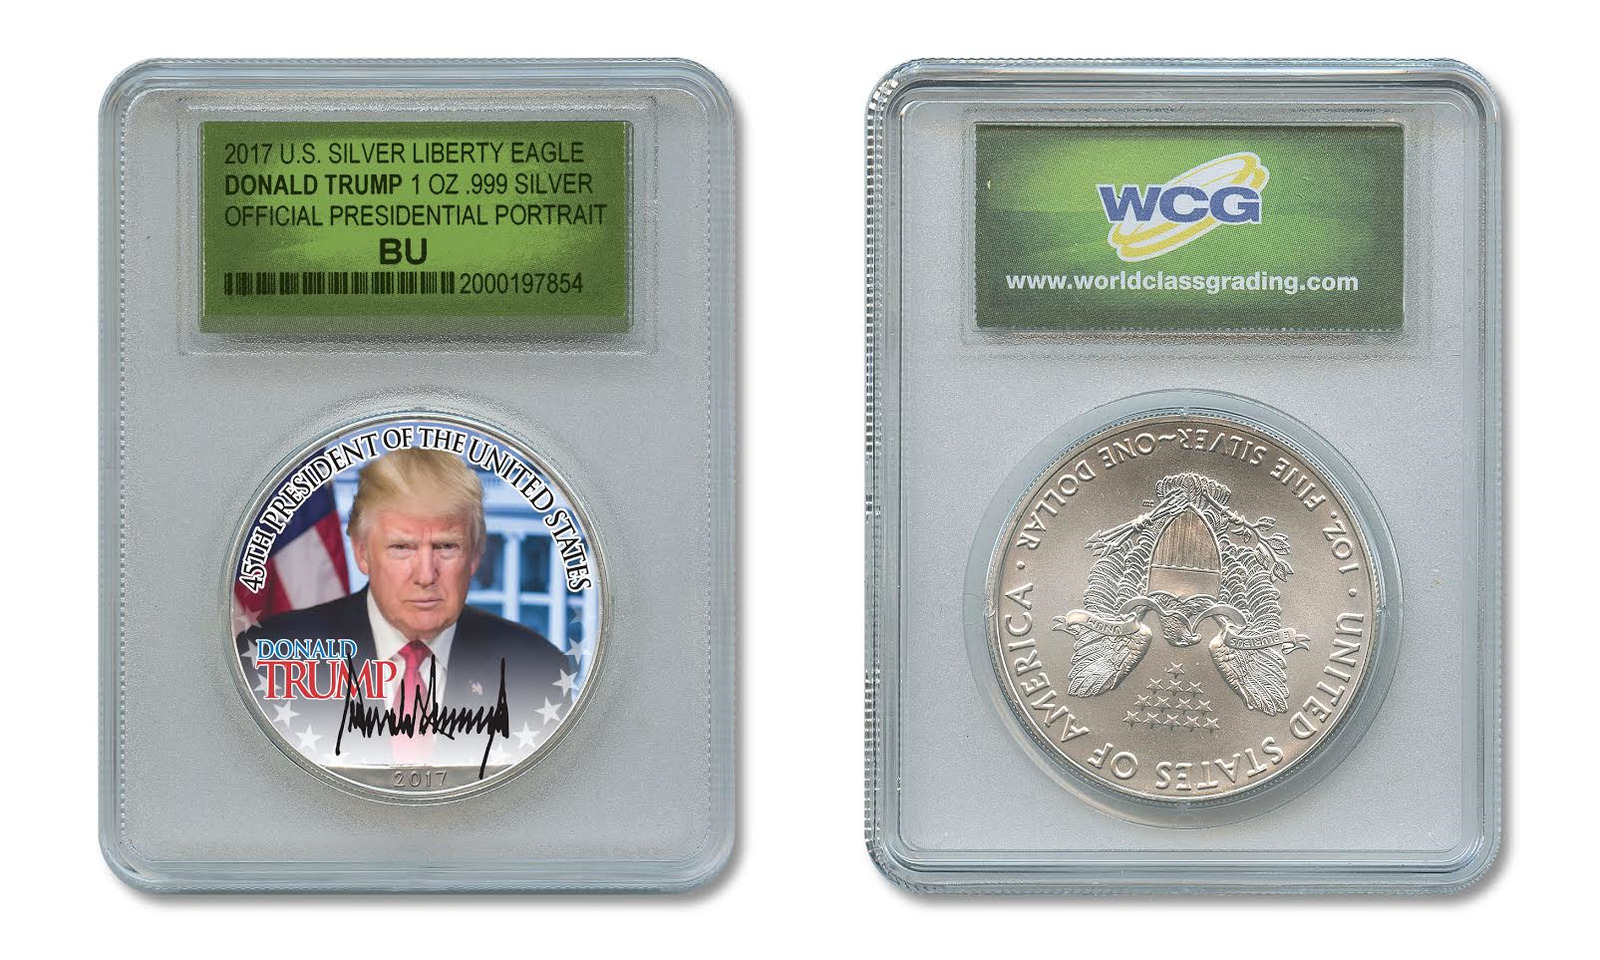 DONALD TRUMP OFFICIAL President PORTRAIT 1oz SILVER EAGLE in SPECIAL HOLDER